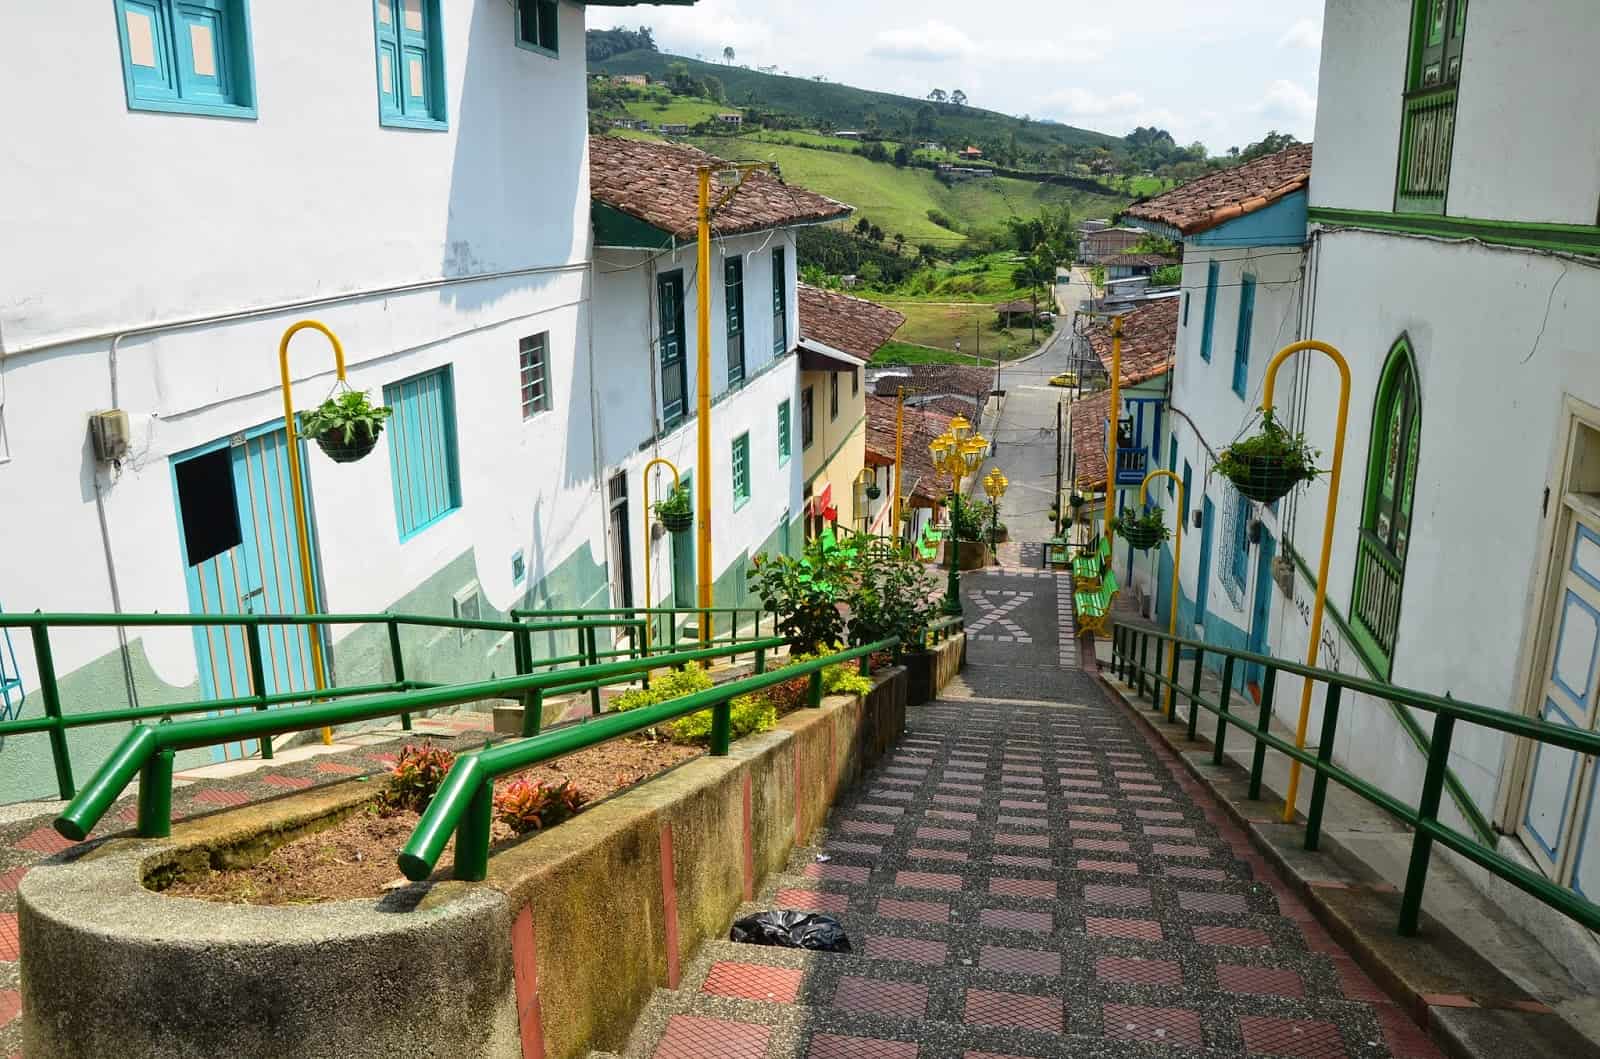 Stairway in Marsella, Risaralda, Colombia